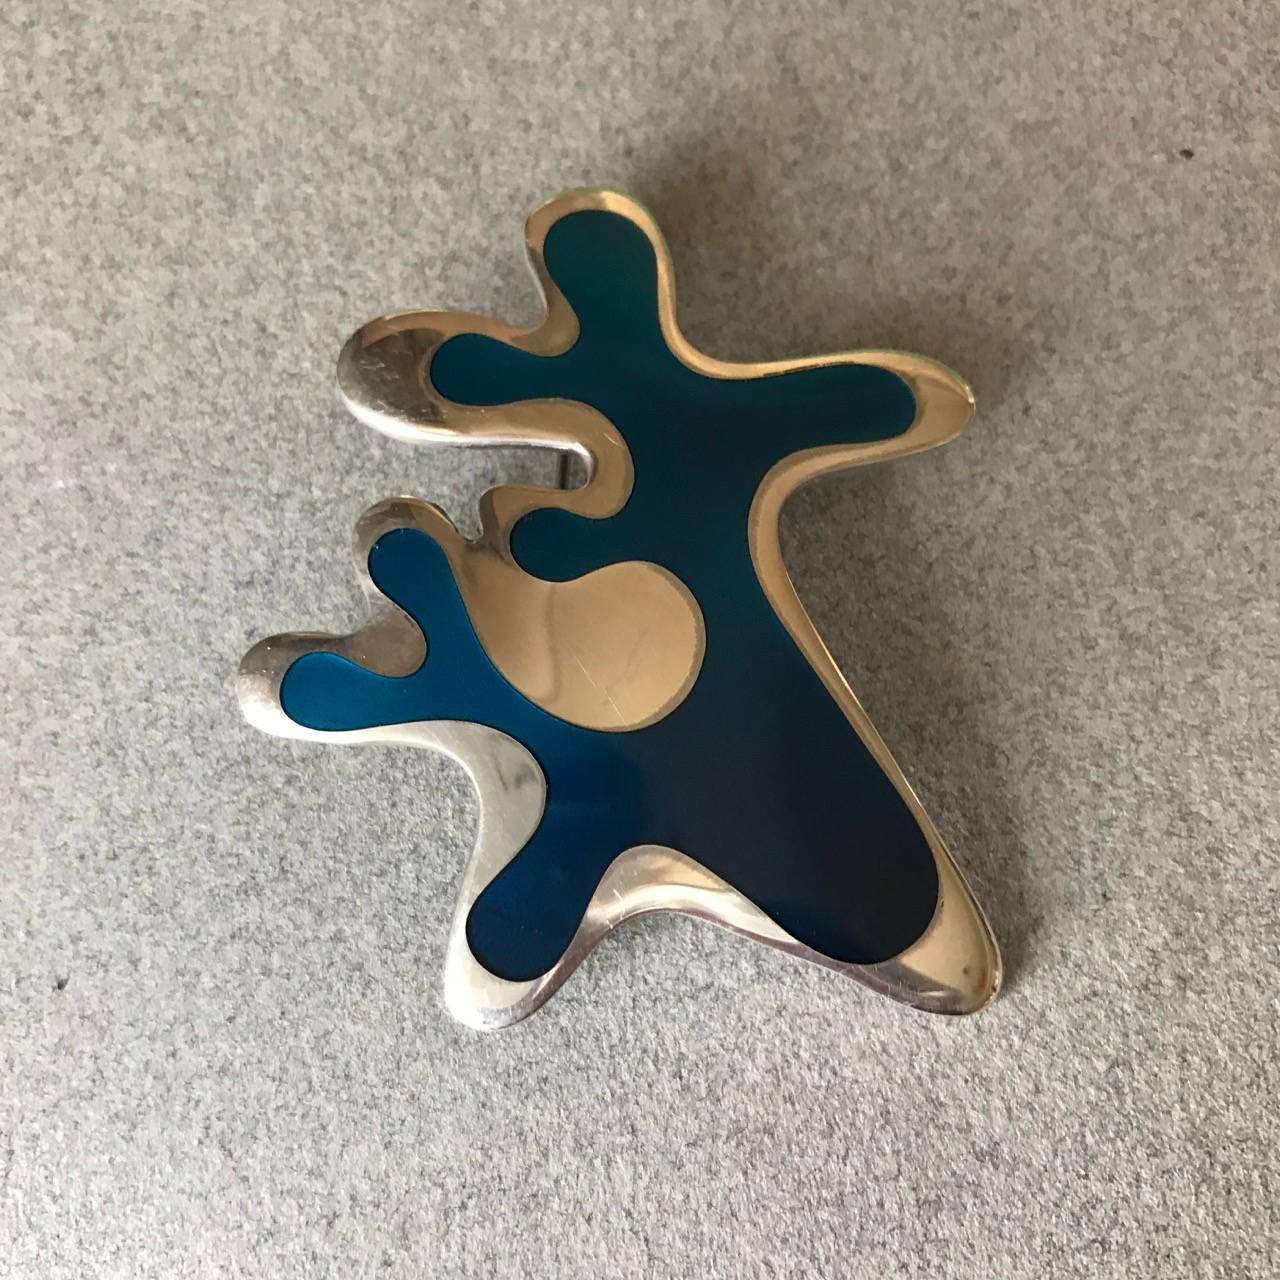 Rare Georg Jensen brooch No. 370 by Henning Koppel. 

This dramatic design is from 1948 and made in that period. Other enamel designs were produced in this genre but this is the rarest of all. 

Excellent condition with some light surface scratches.